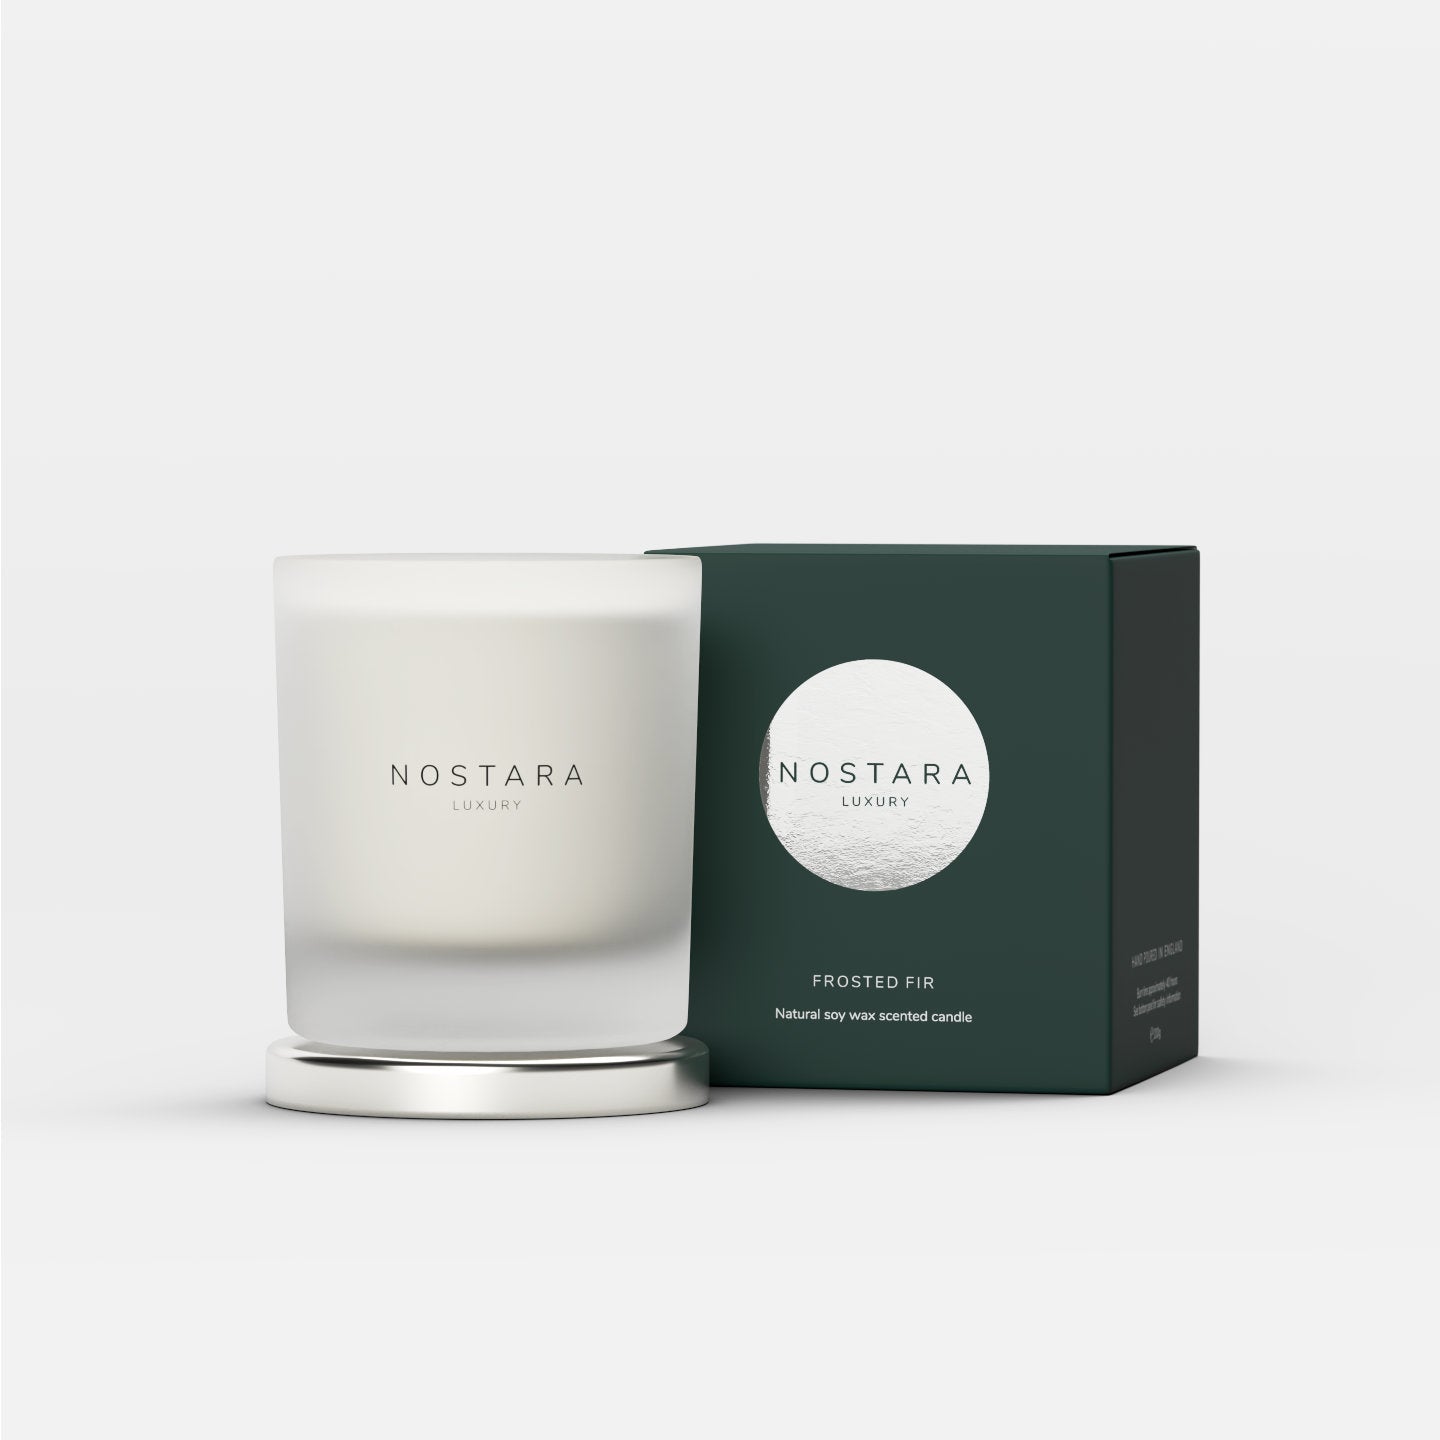 Nostara Frosted Fir Scented Candle & Box Image 